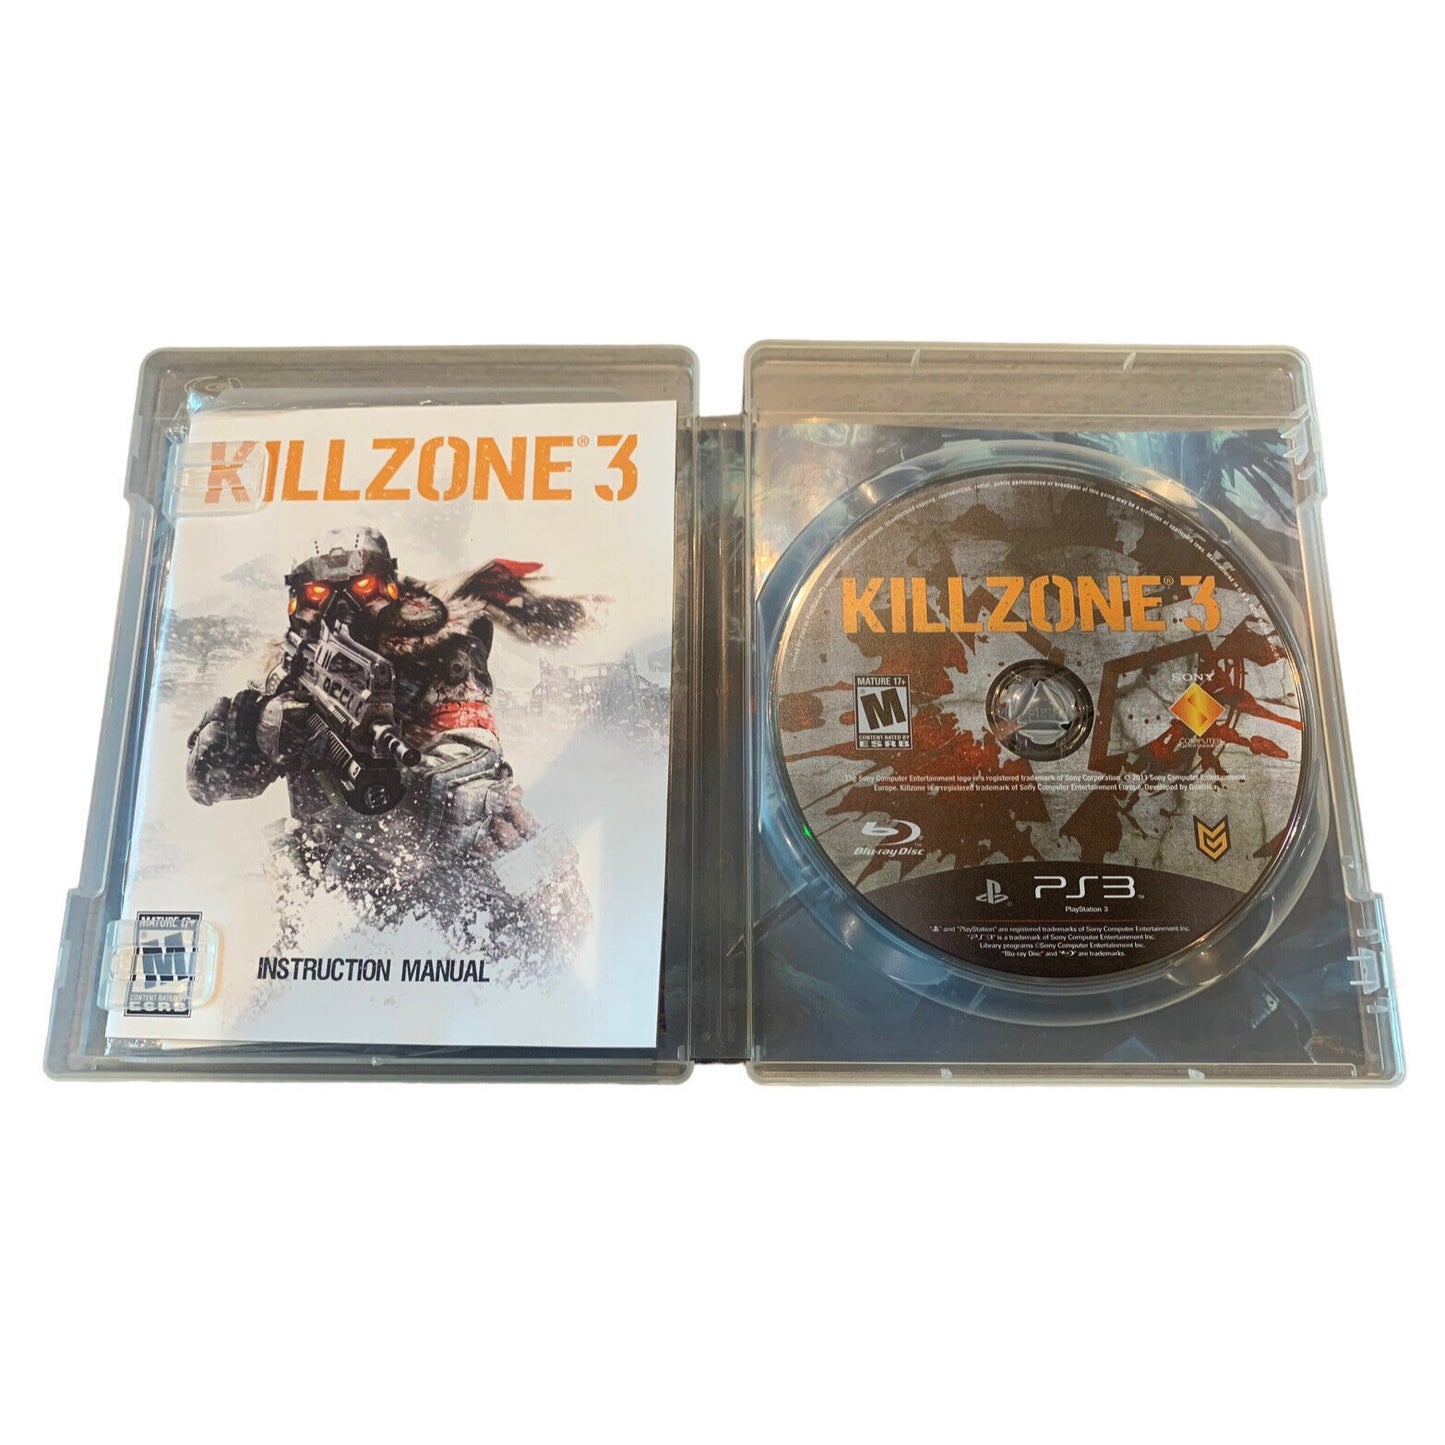 image of game disc and game booklet